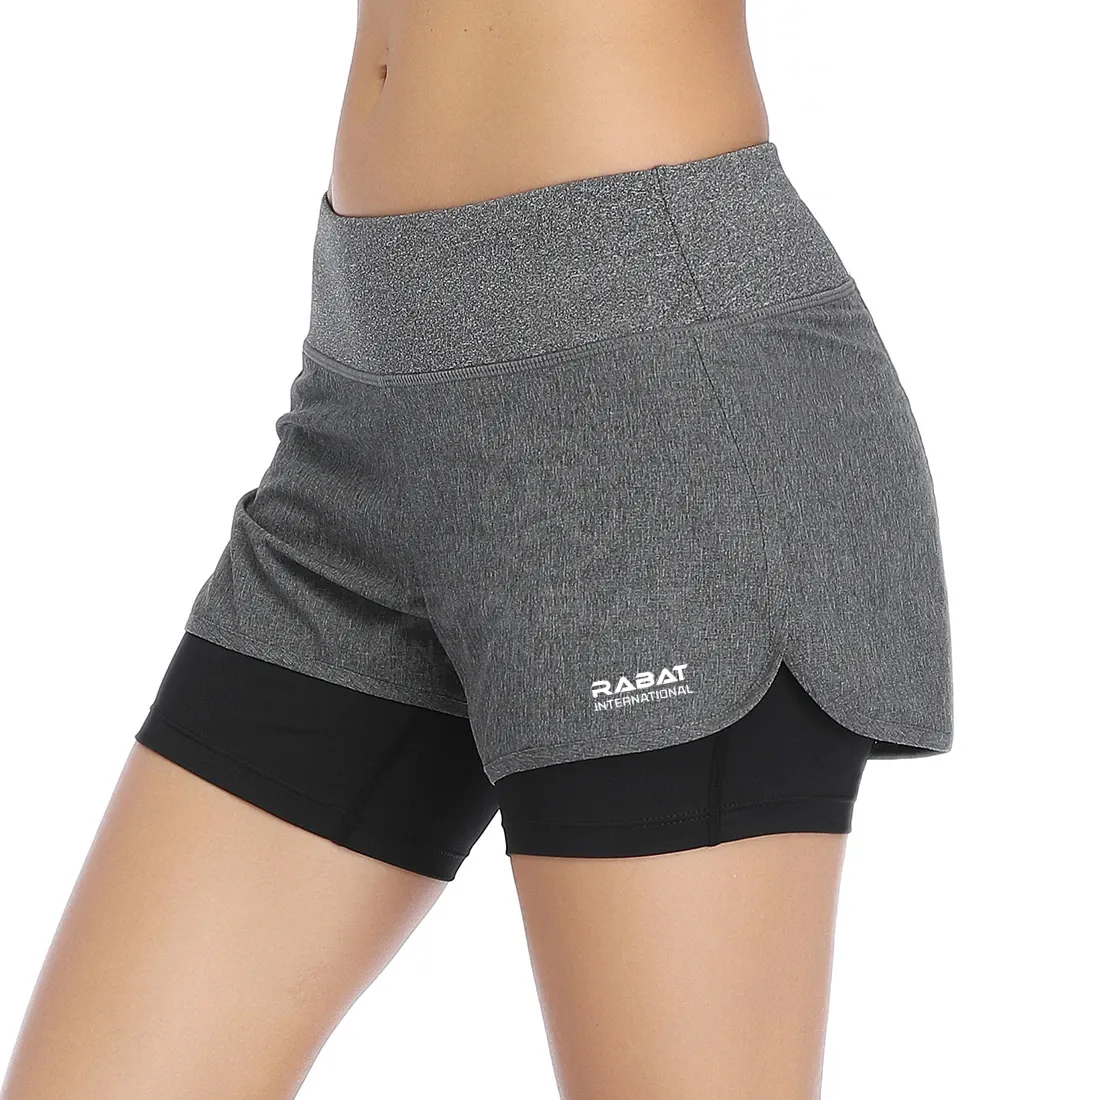 Women Yoga Shorts Fitness Double Layered Spandex Elastic Running Workout Shorts Leggings for Ladies Gym Sport Short Pants